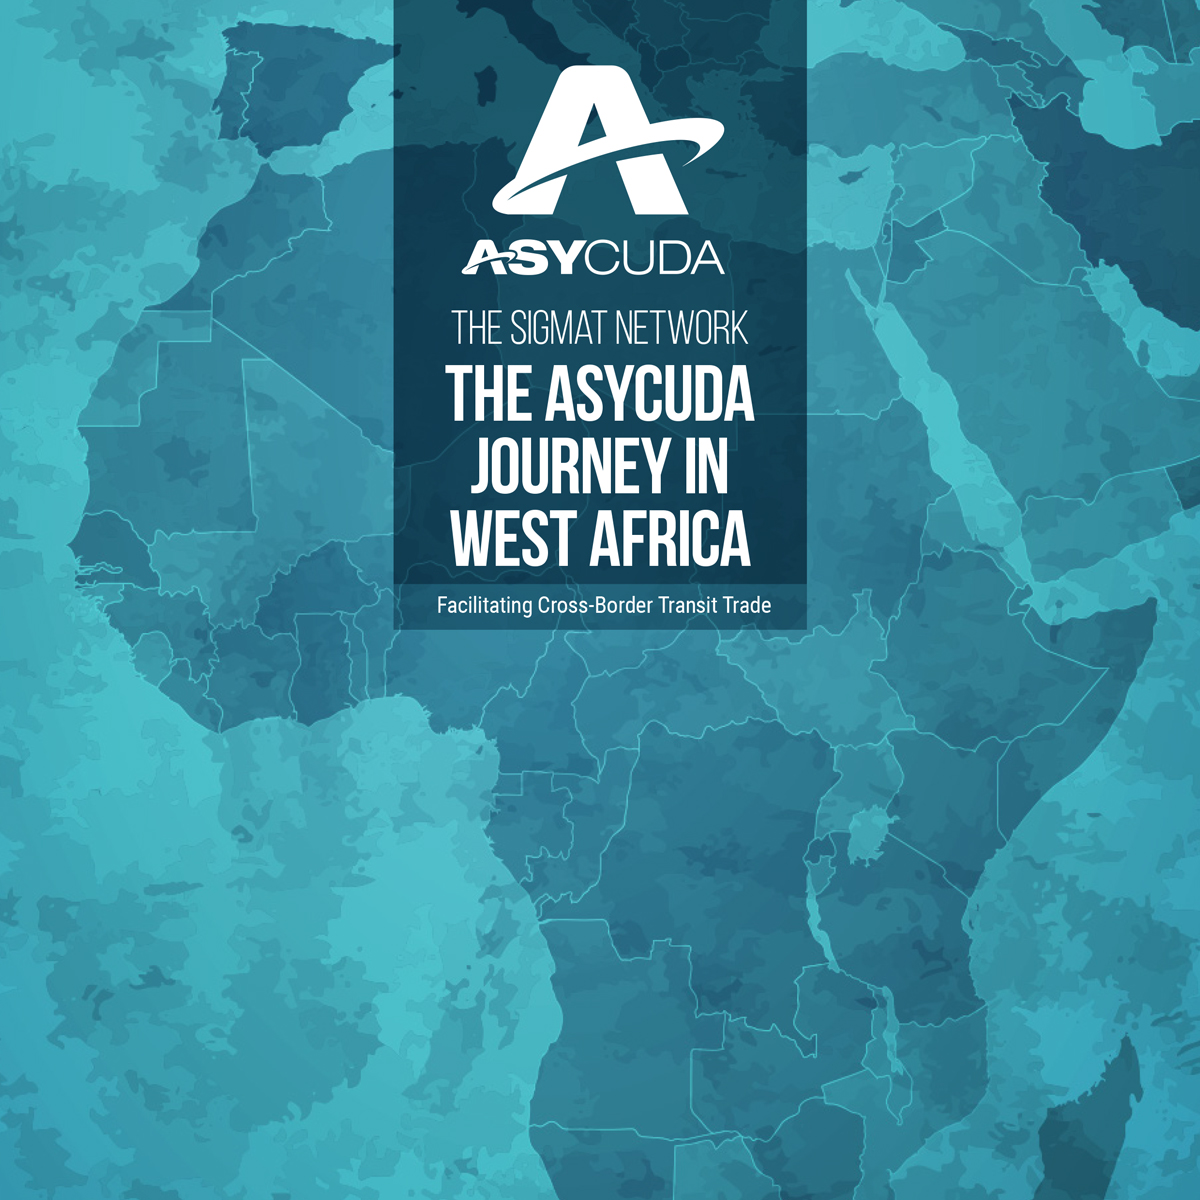 SIGMAT: ASYCUDA's Journey in West Africa